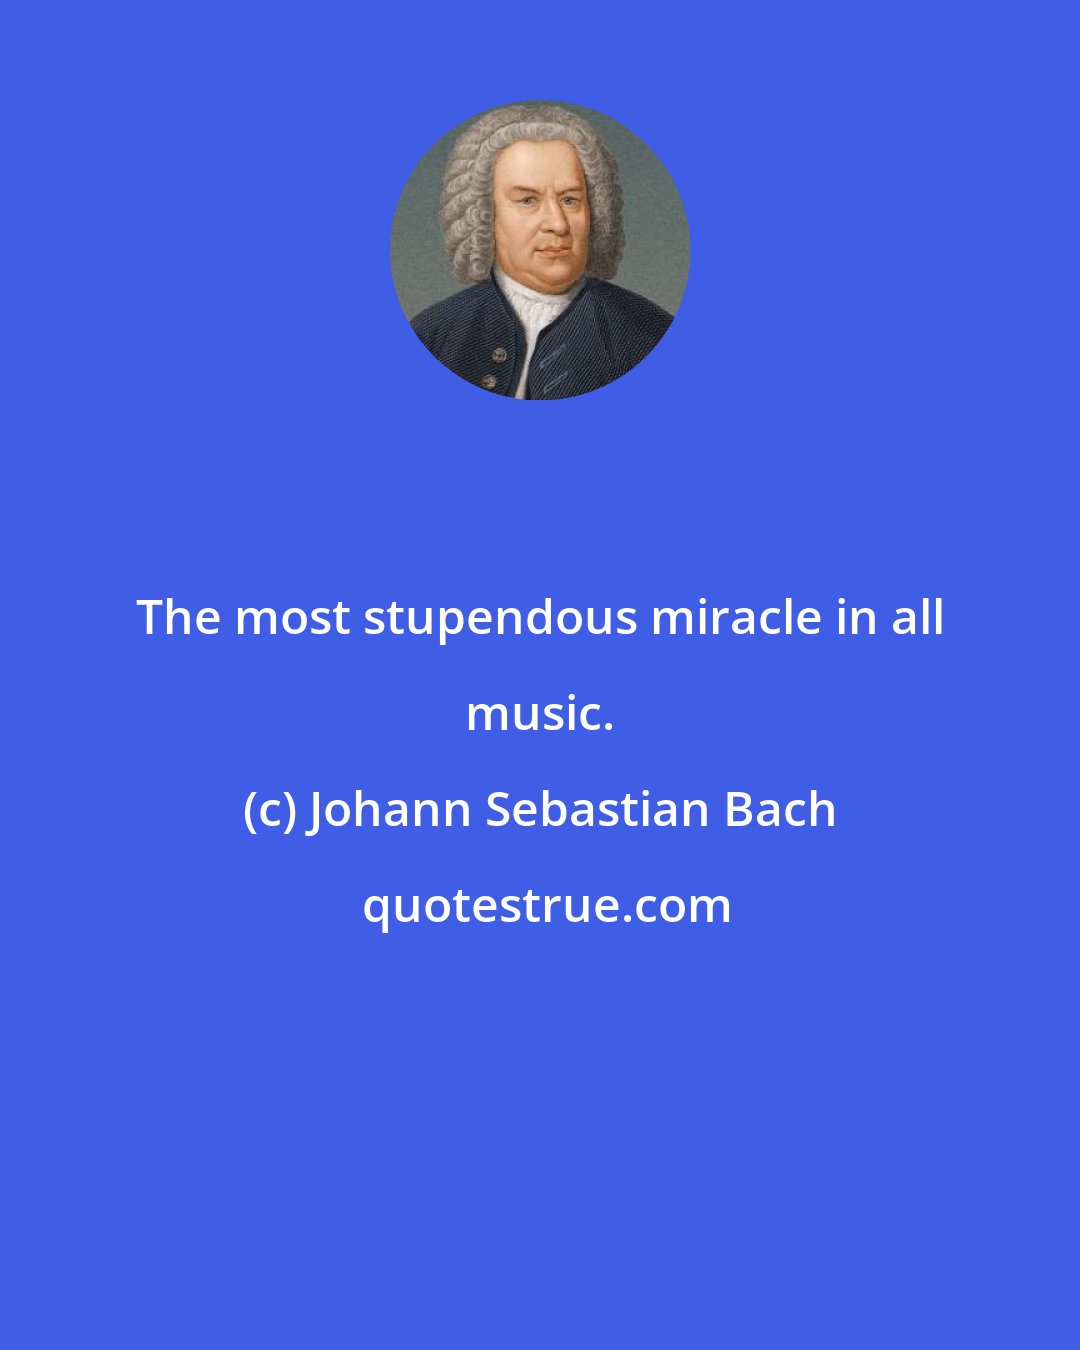 Johann Sebastian Bach: The most stupendous miracle in all music.